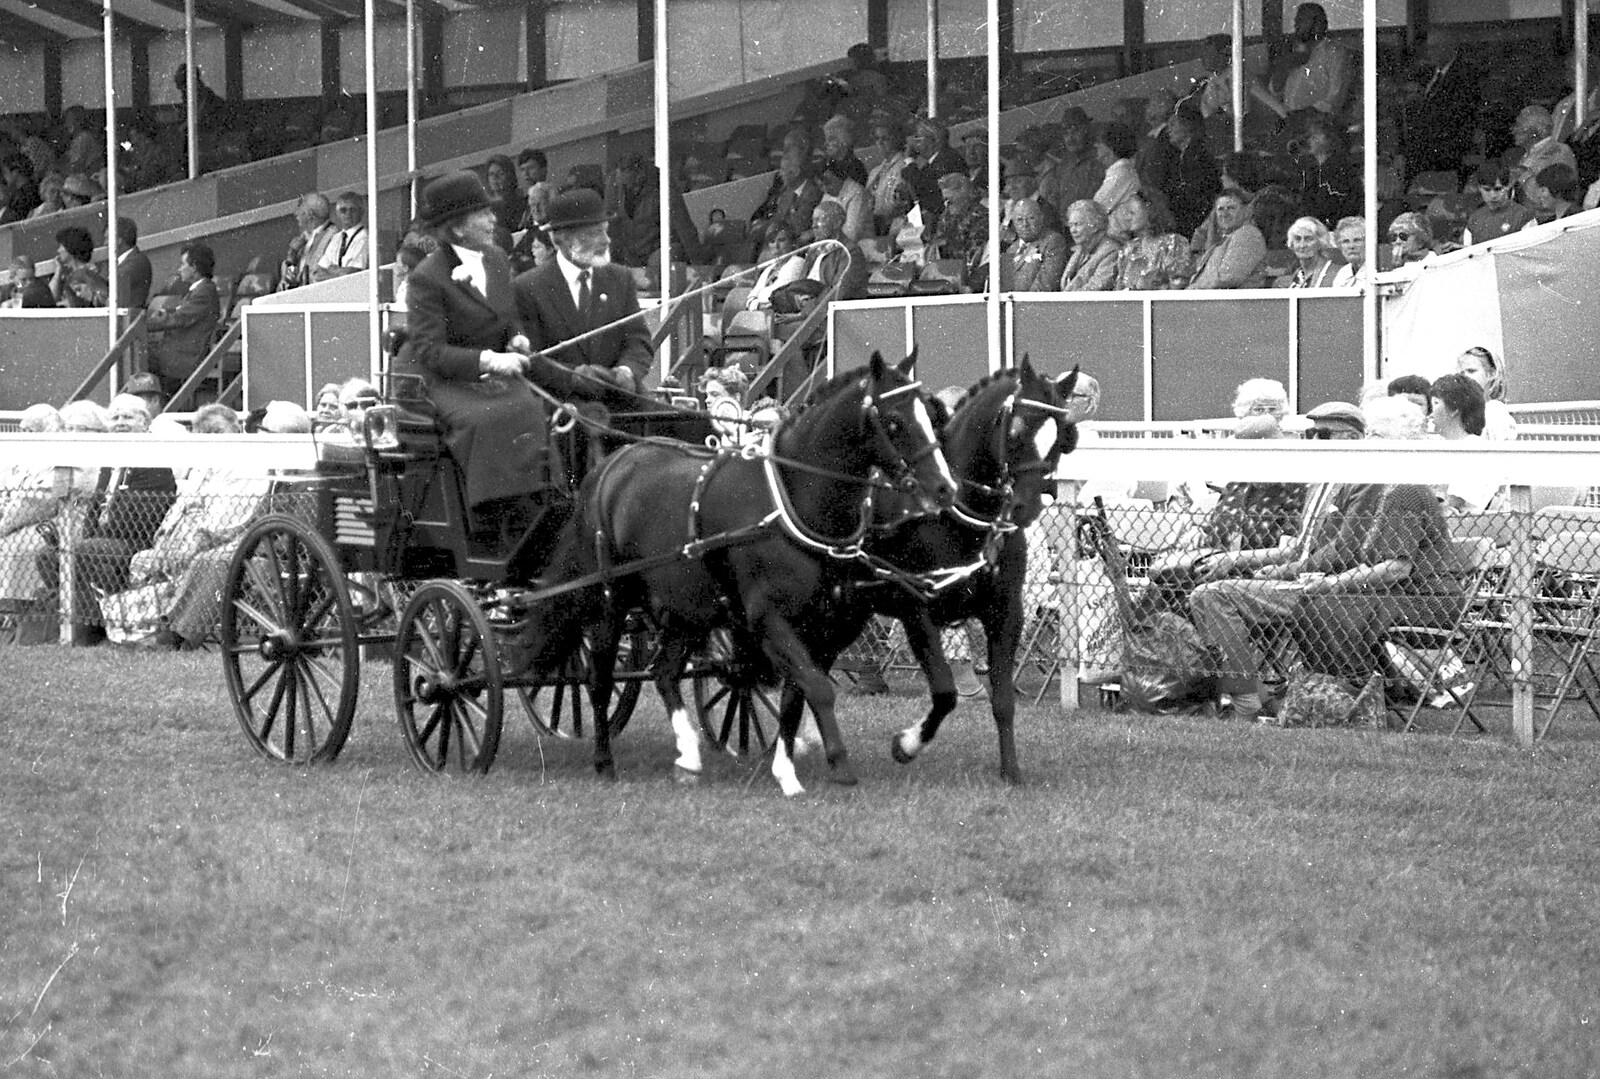 A pair of horses haul a carriage around from The Royal Norfolk Show, Costessey Showground, Norwich - June 20th 1994